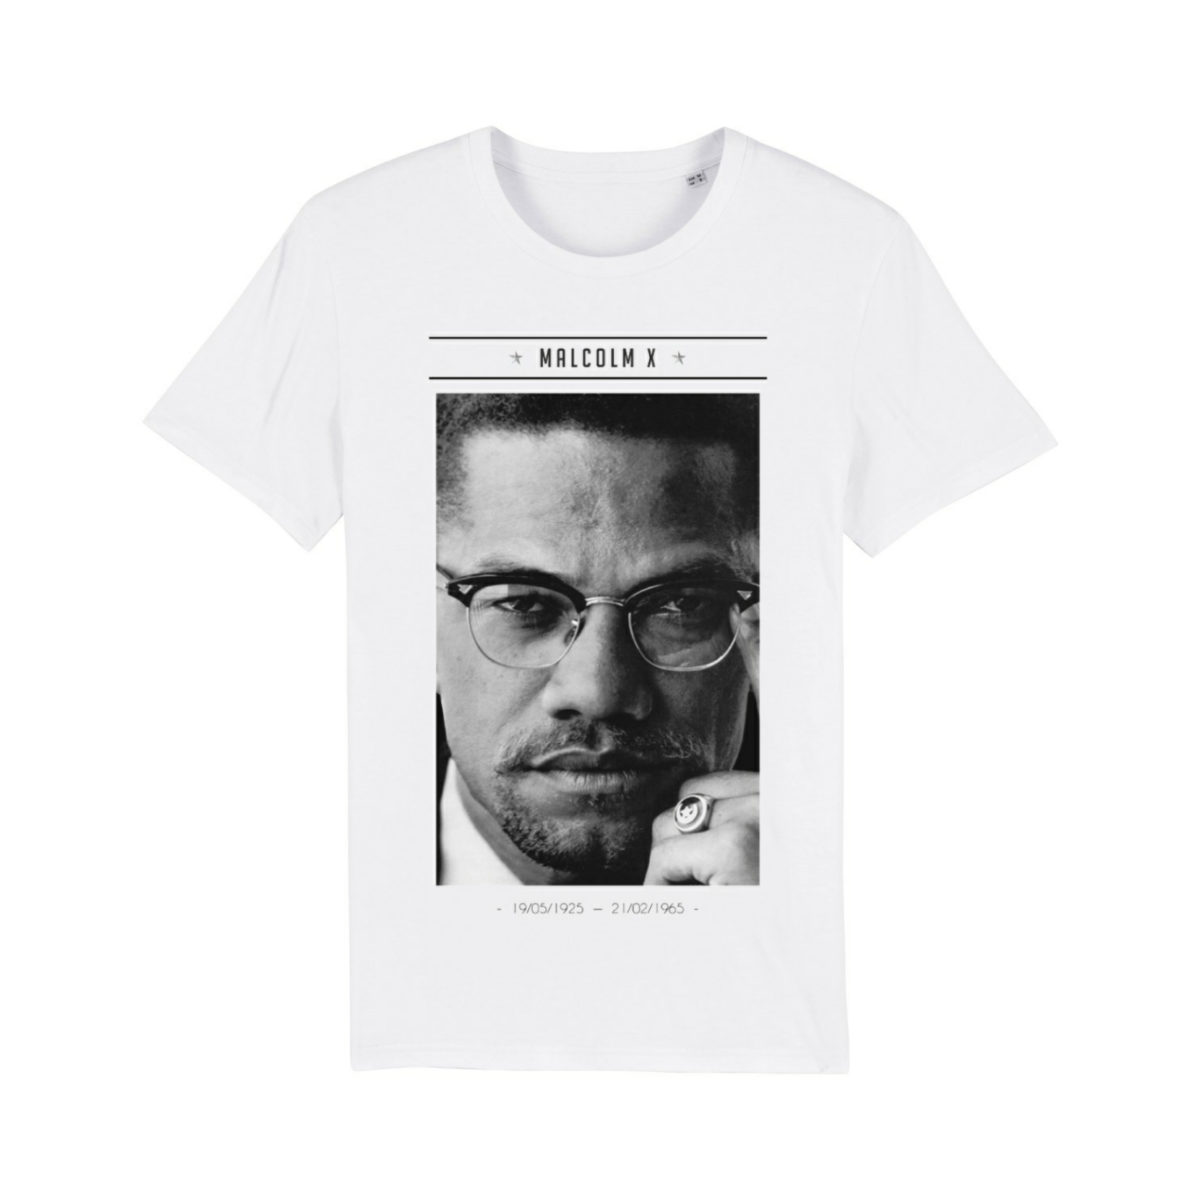 My T-Shirt Afro – “Malcolm X”